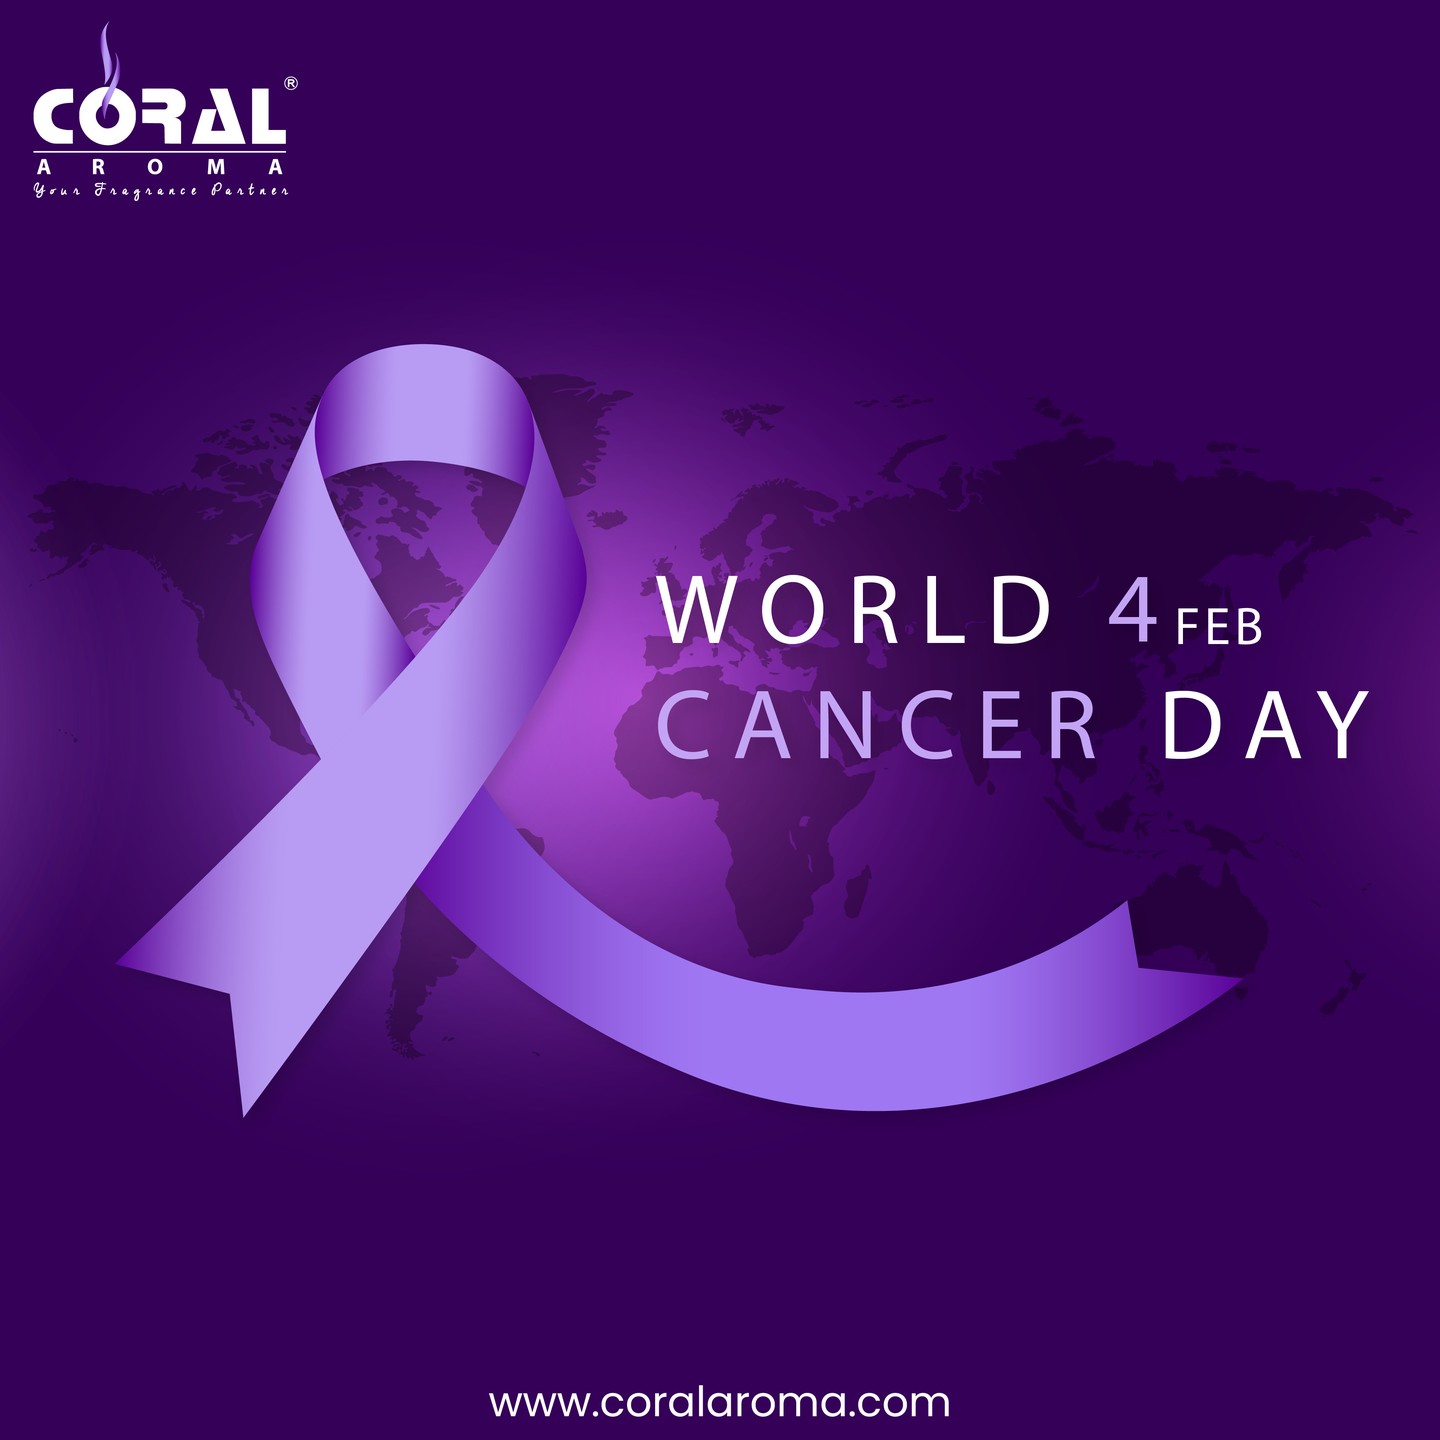 You know, once you've stood up to cancer, everything else feels like a pretty easy fight.

#WorldCancerDay #cancerawareness #WorldCancerDay2023 #uae